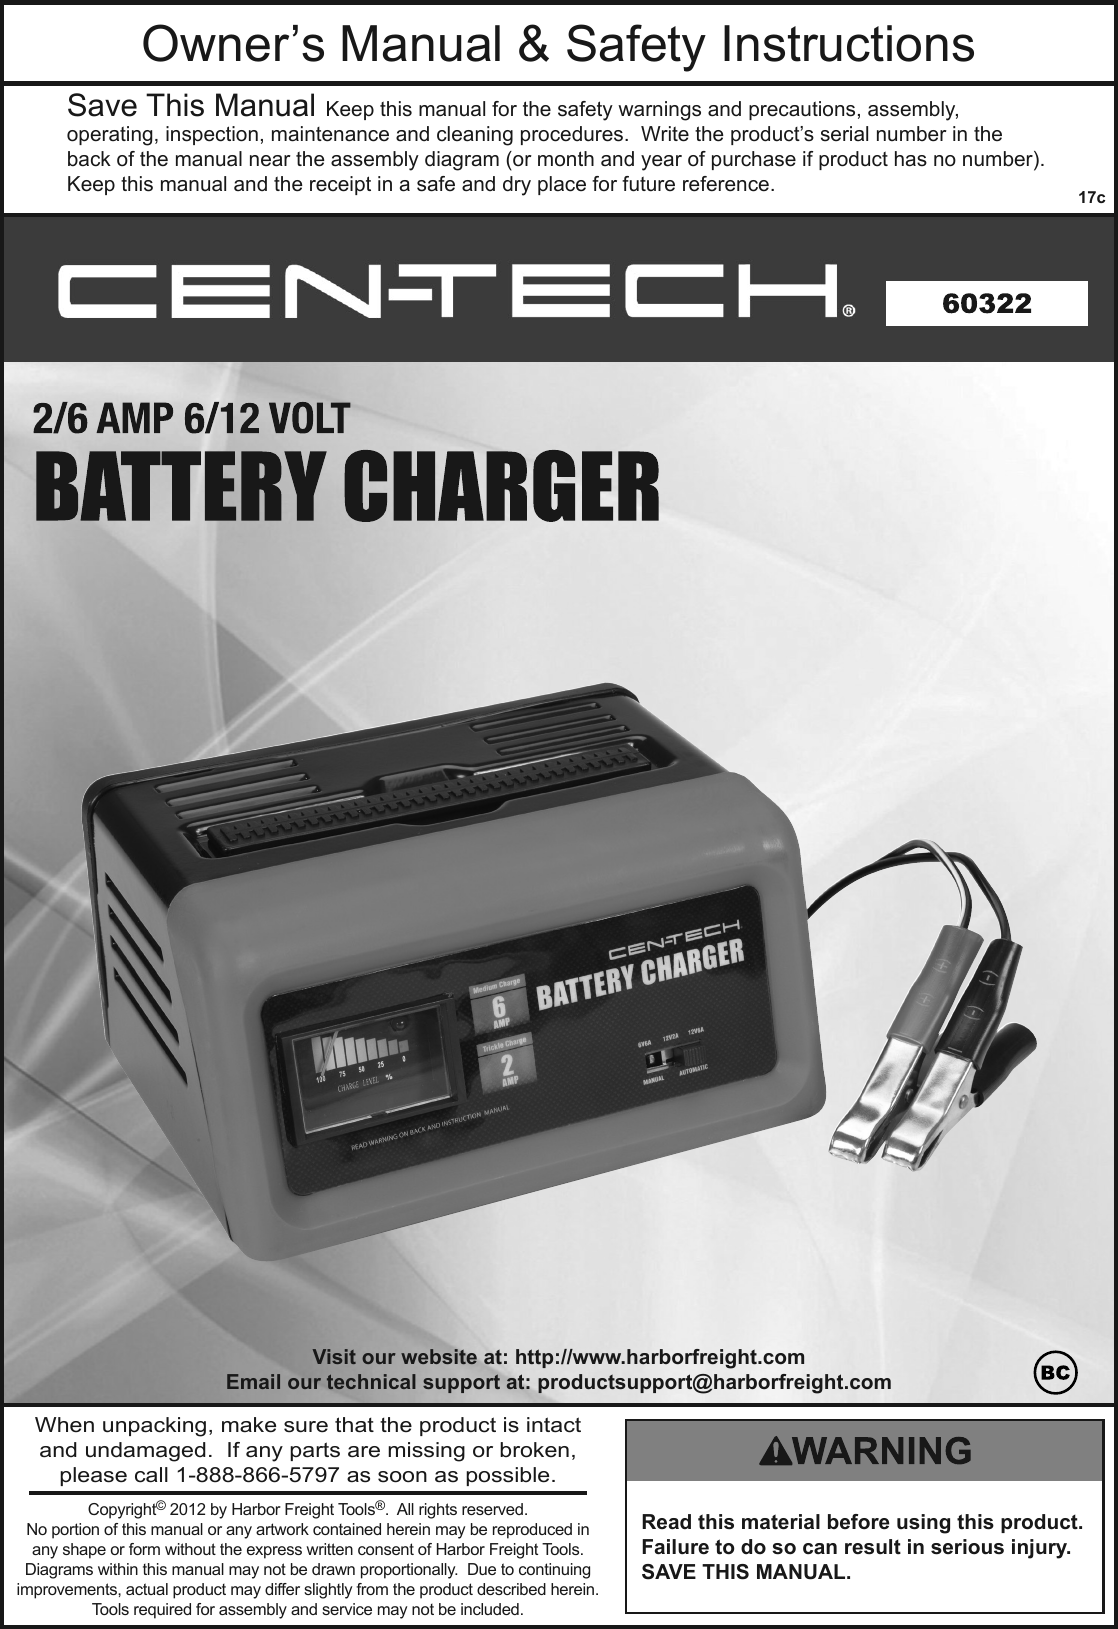 Manual For The 60322 2/6 Amp, 6/12 Volt Battery Charger